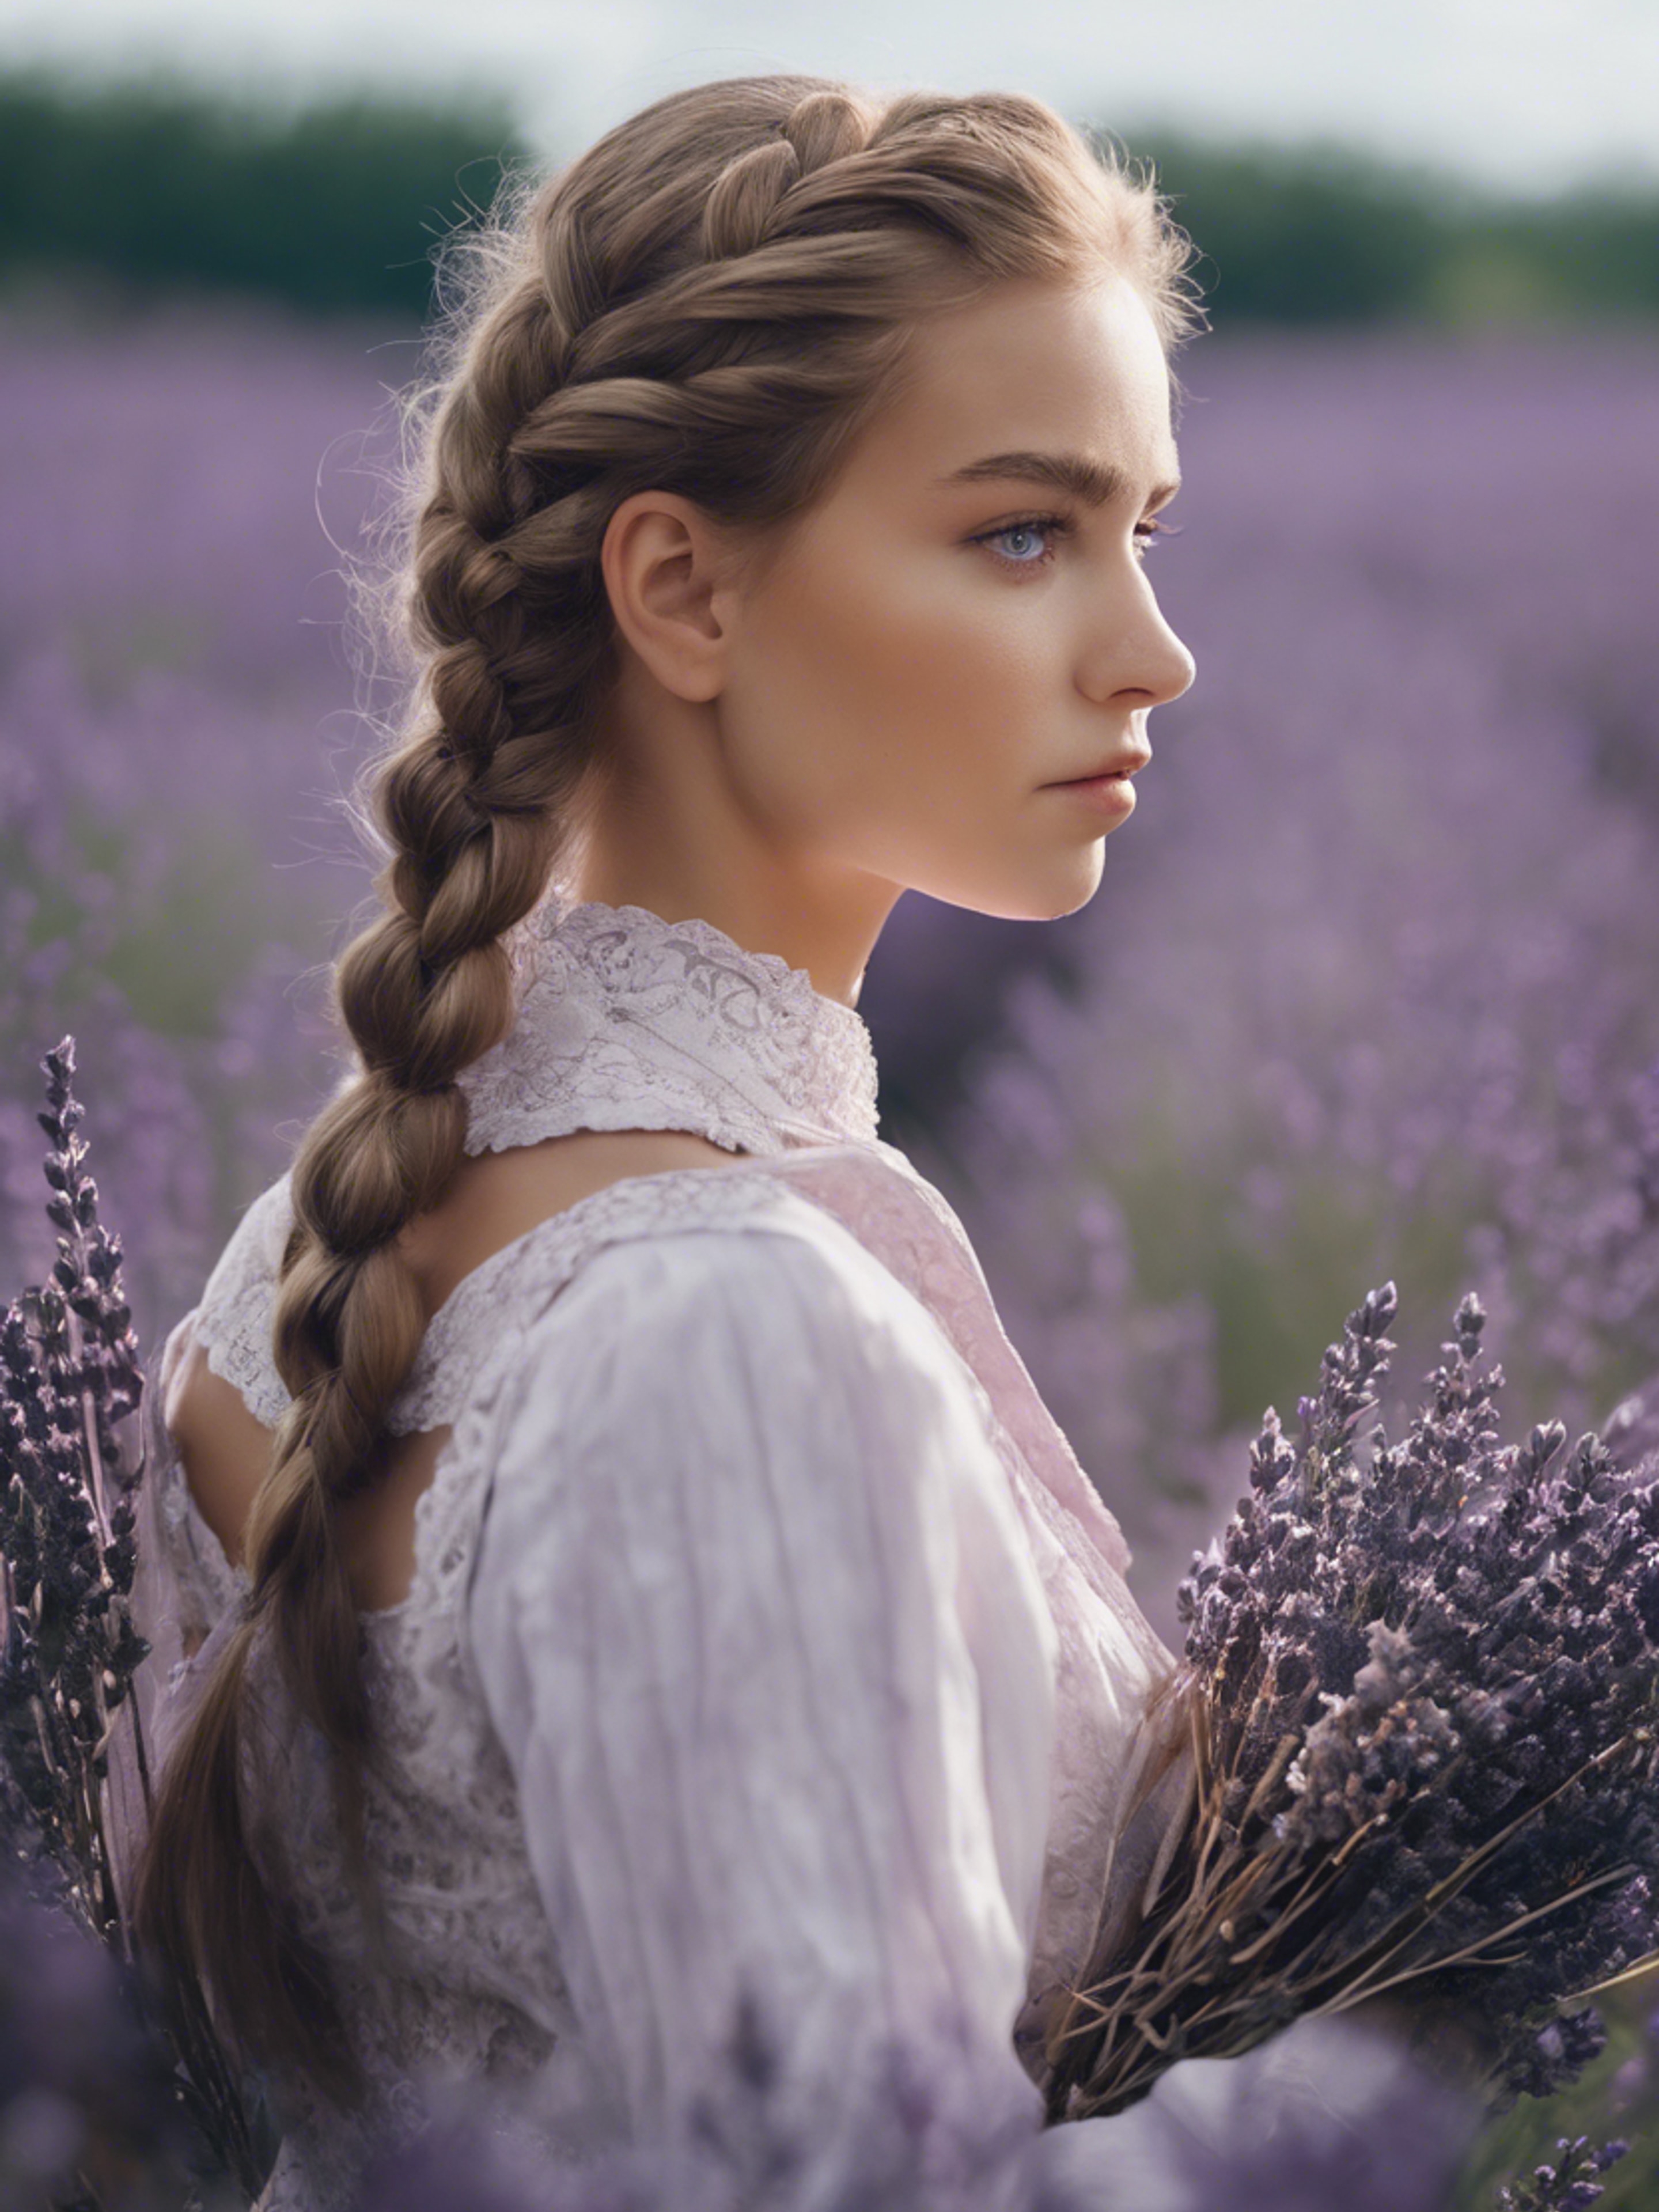 A pretty, light-eyed girl with her hair done in classic French braid, surrounded by a field of French lavender.壁紙[c71d23e36c7041a09435]